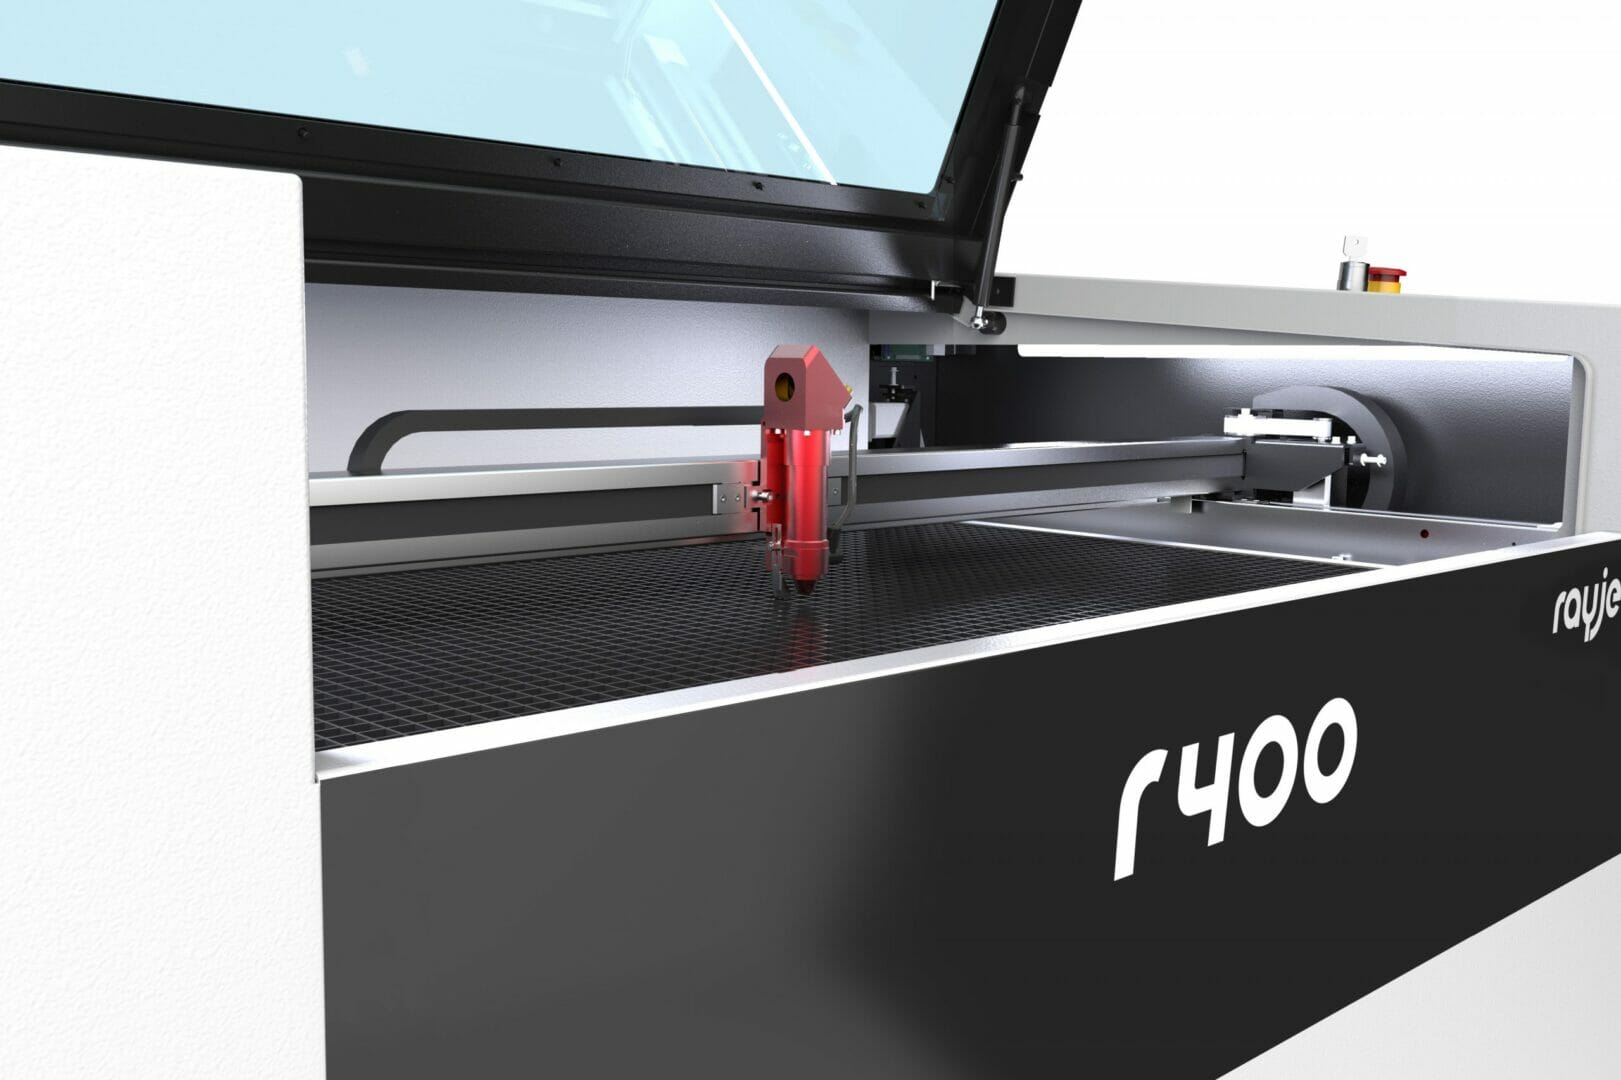 Trotec launches new affordable laser cutter @TrotecUK